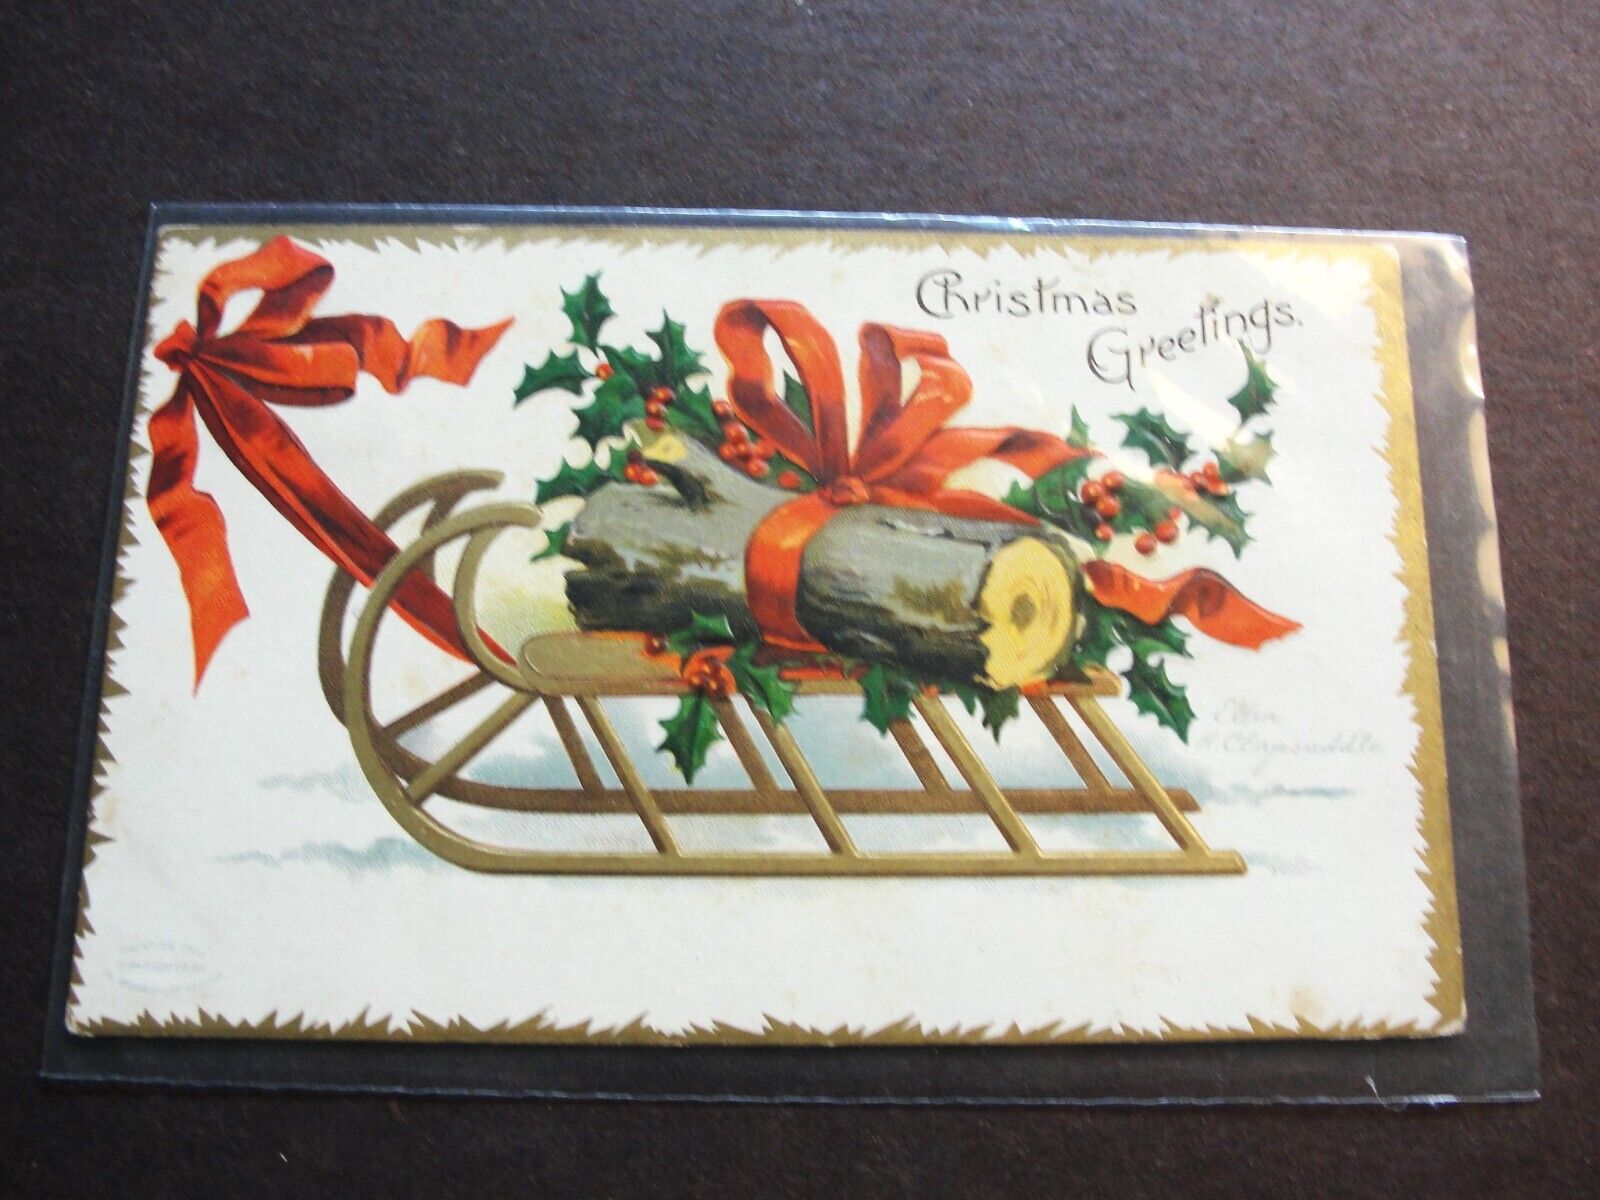 Christmas Greetings Happiness without limit -Postmarked 1907 Embossed Postcard.